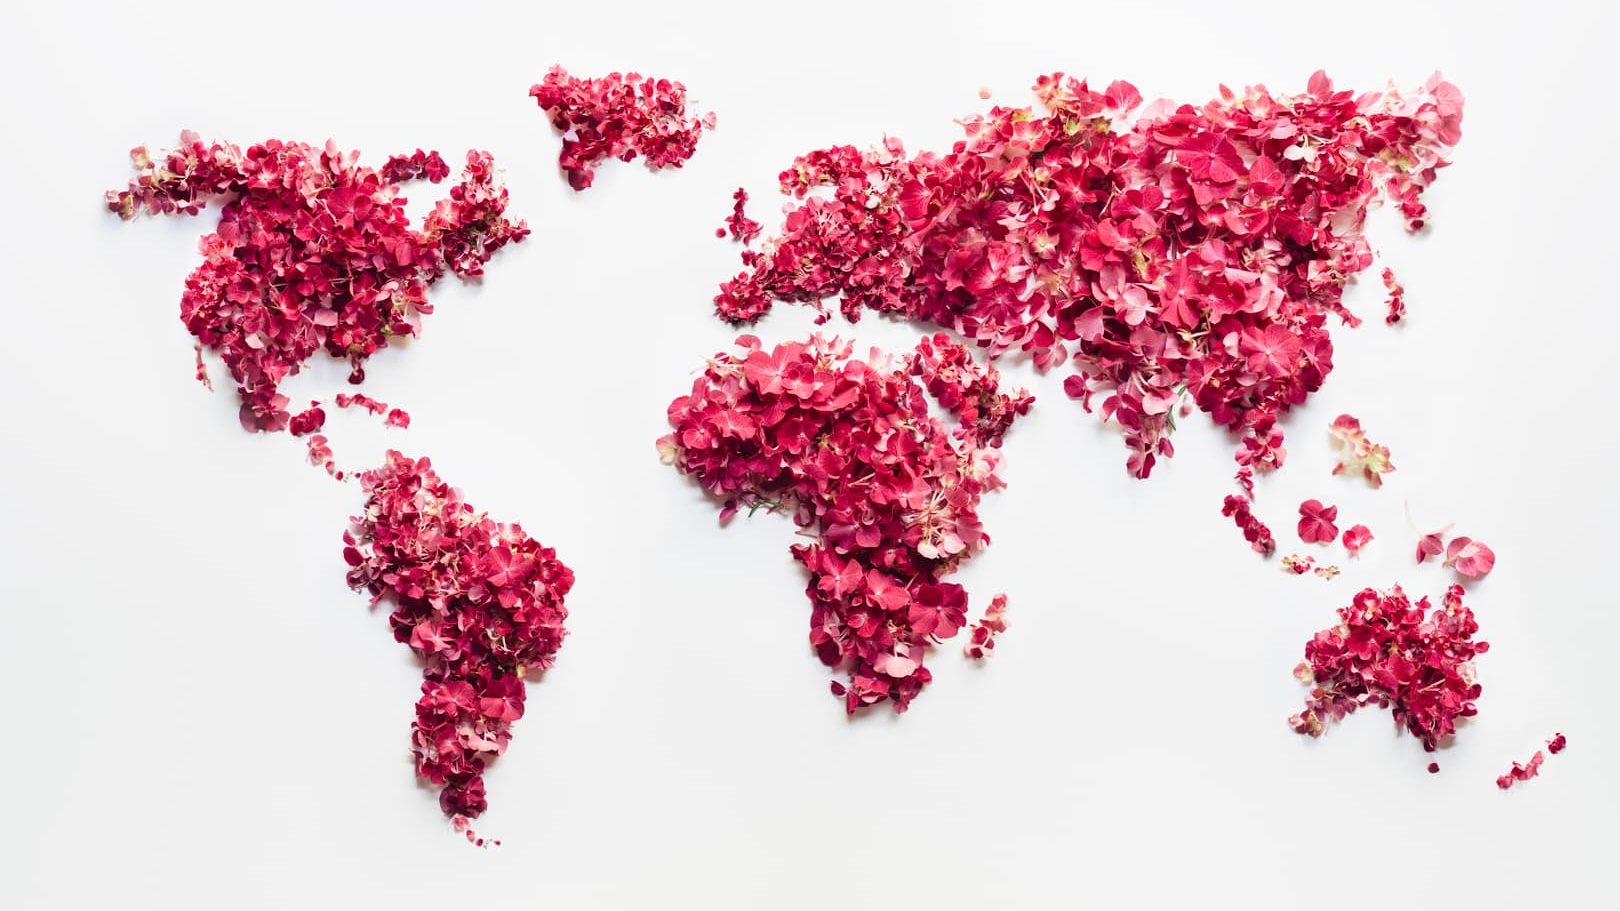 Handmade word map made of pink flowers and flower petals